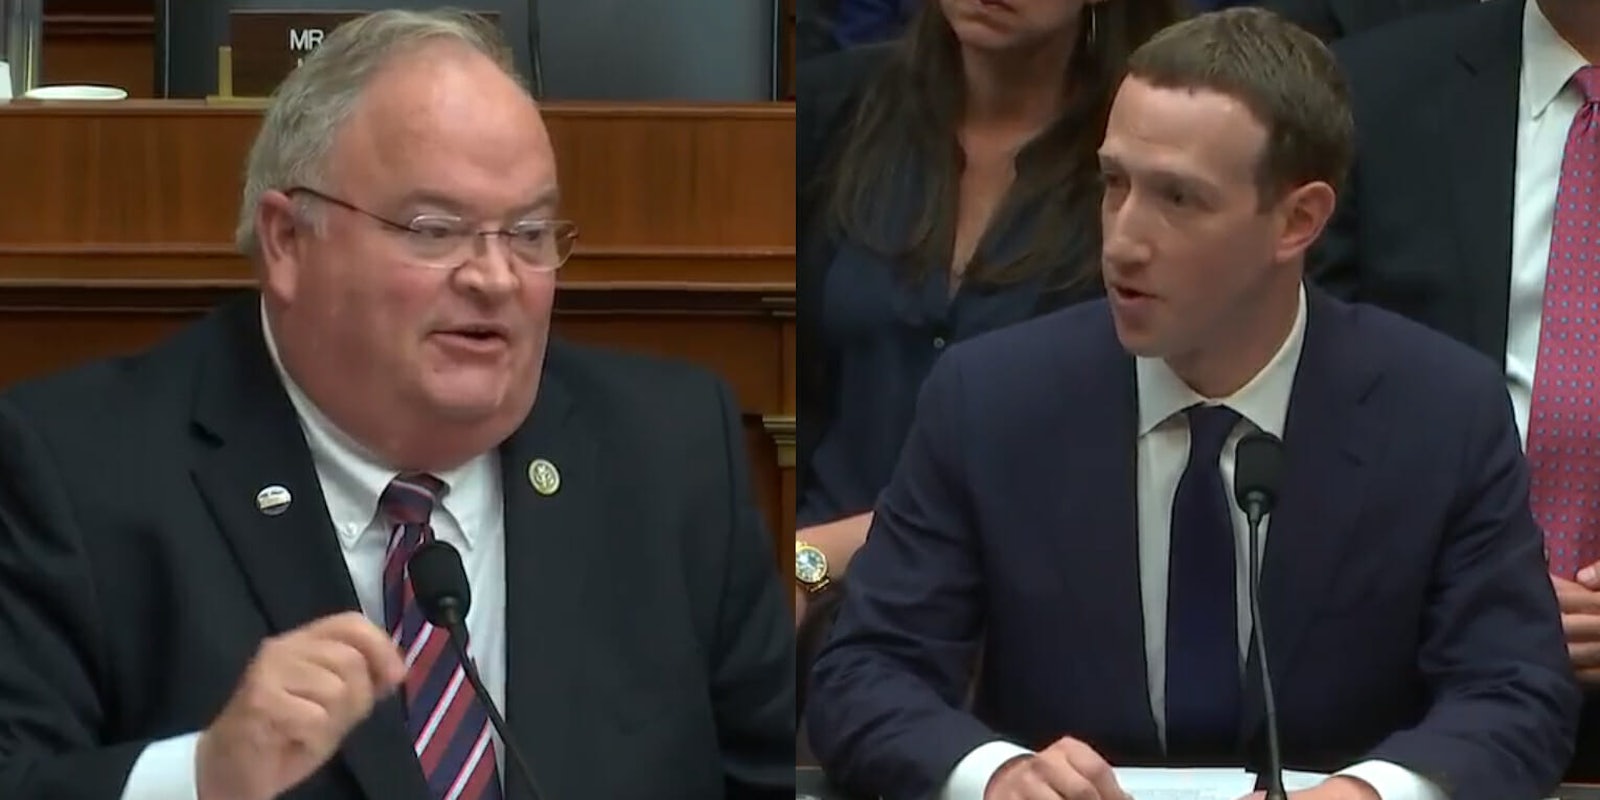 Facebook CEO Mark Zuckeberg was asked about something he'd probably like people to forget during his testimony on Wednesday in front of Congress: FaceMash. 